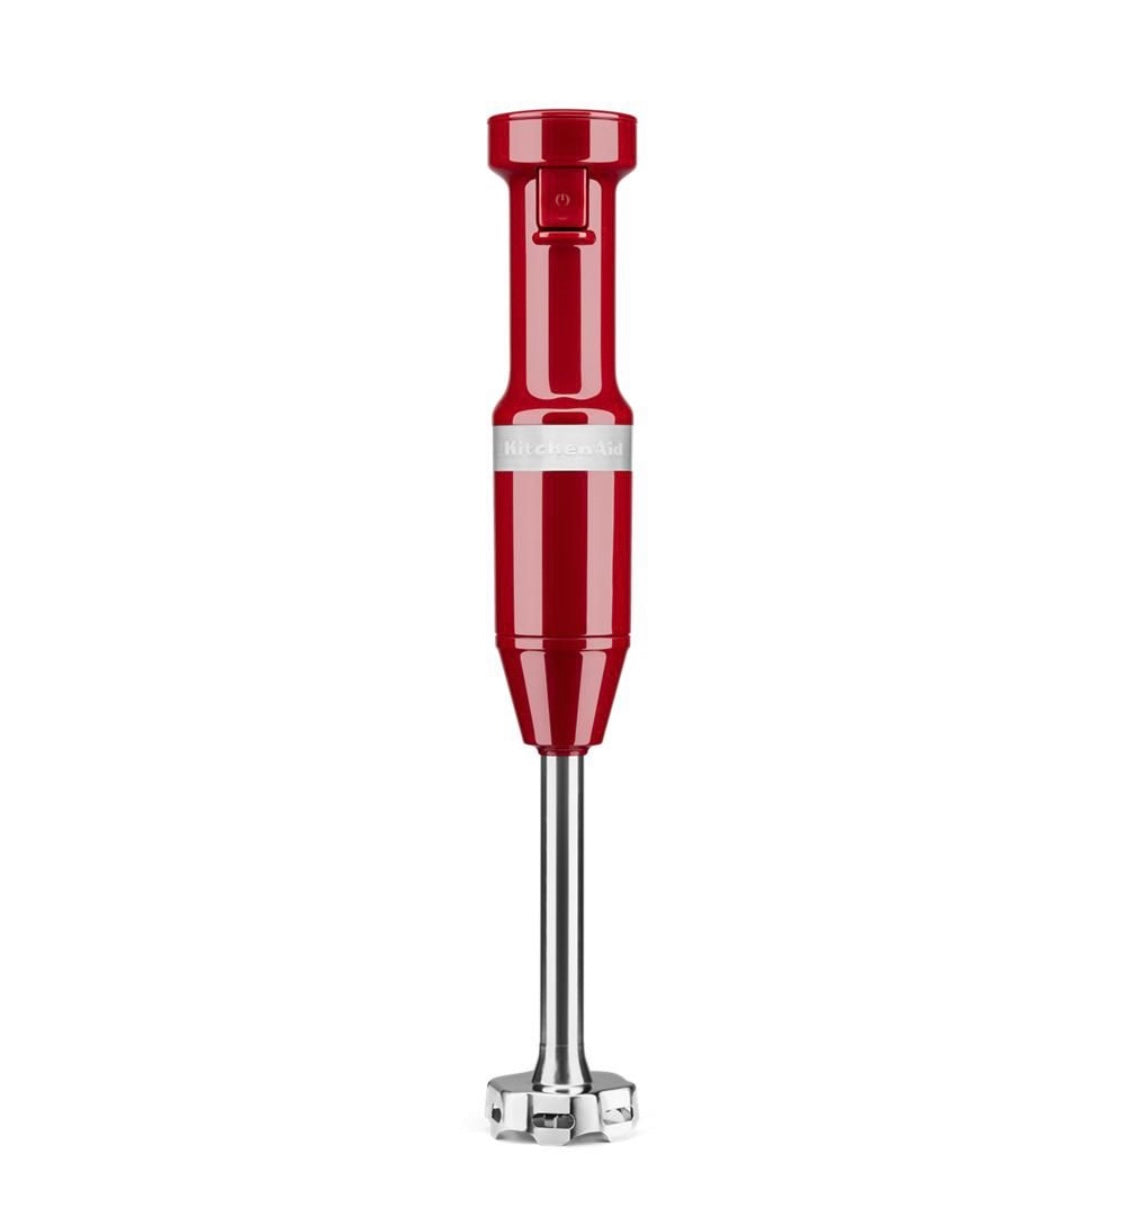 Mixer KitchenAid Variable Speed Corded Hand Blender Empire Red